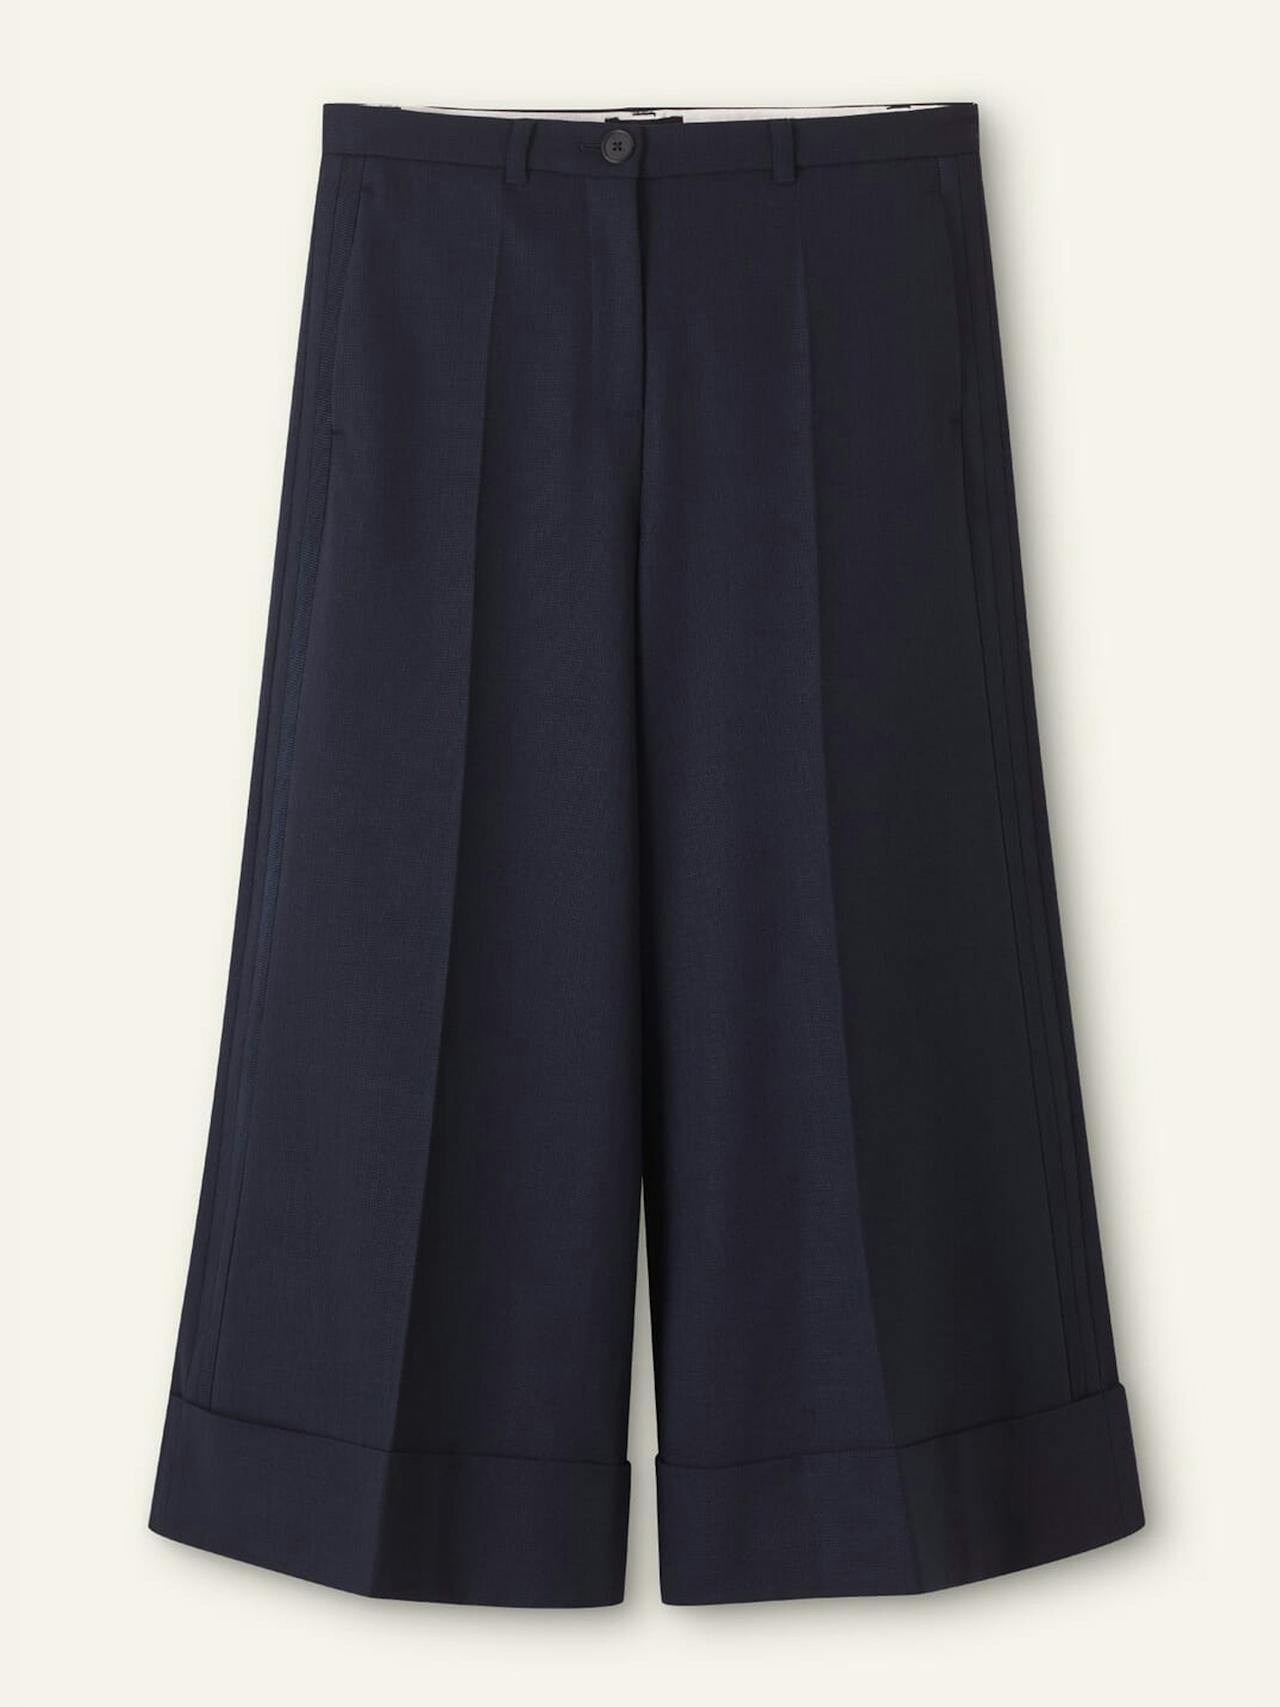 Wool-blend exaggerated crop trousers